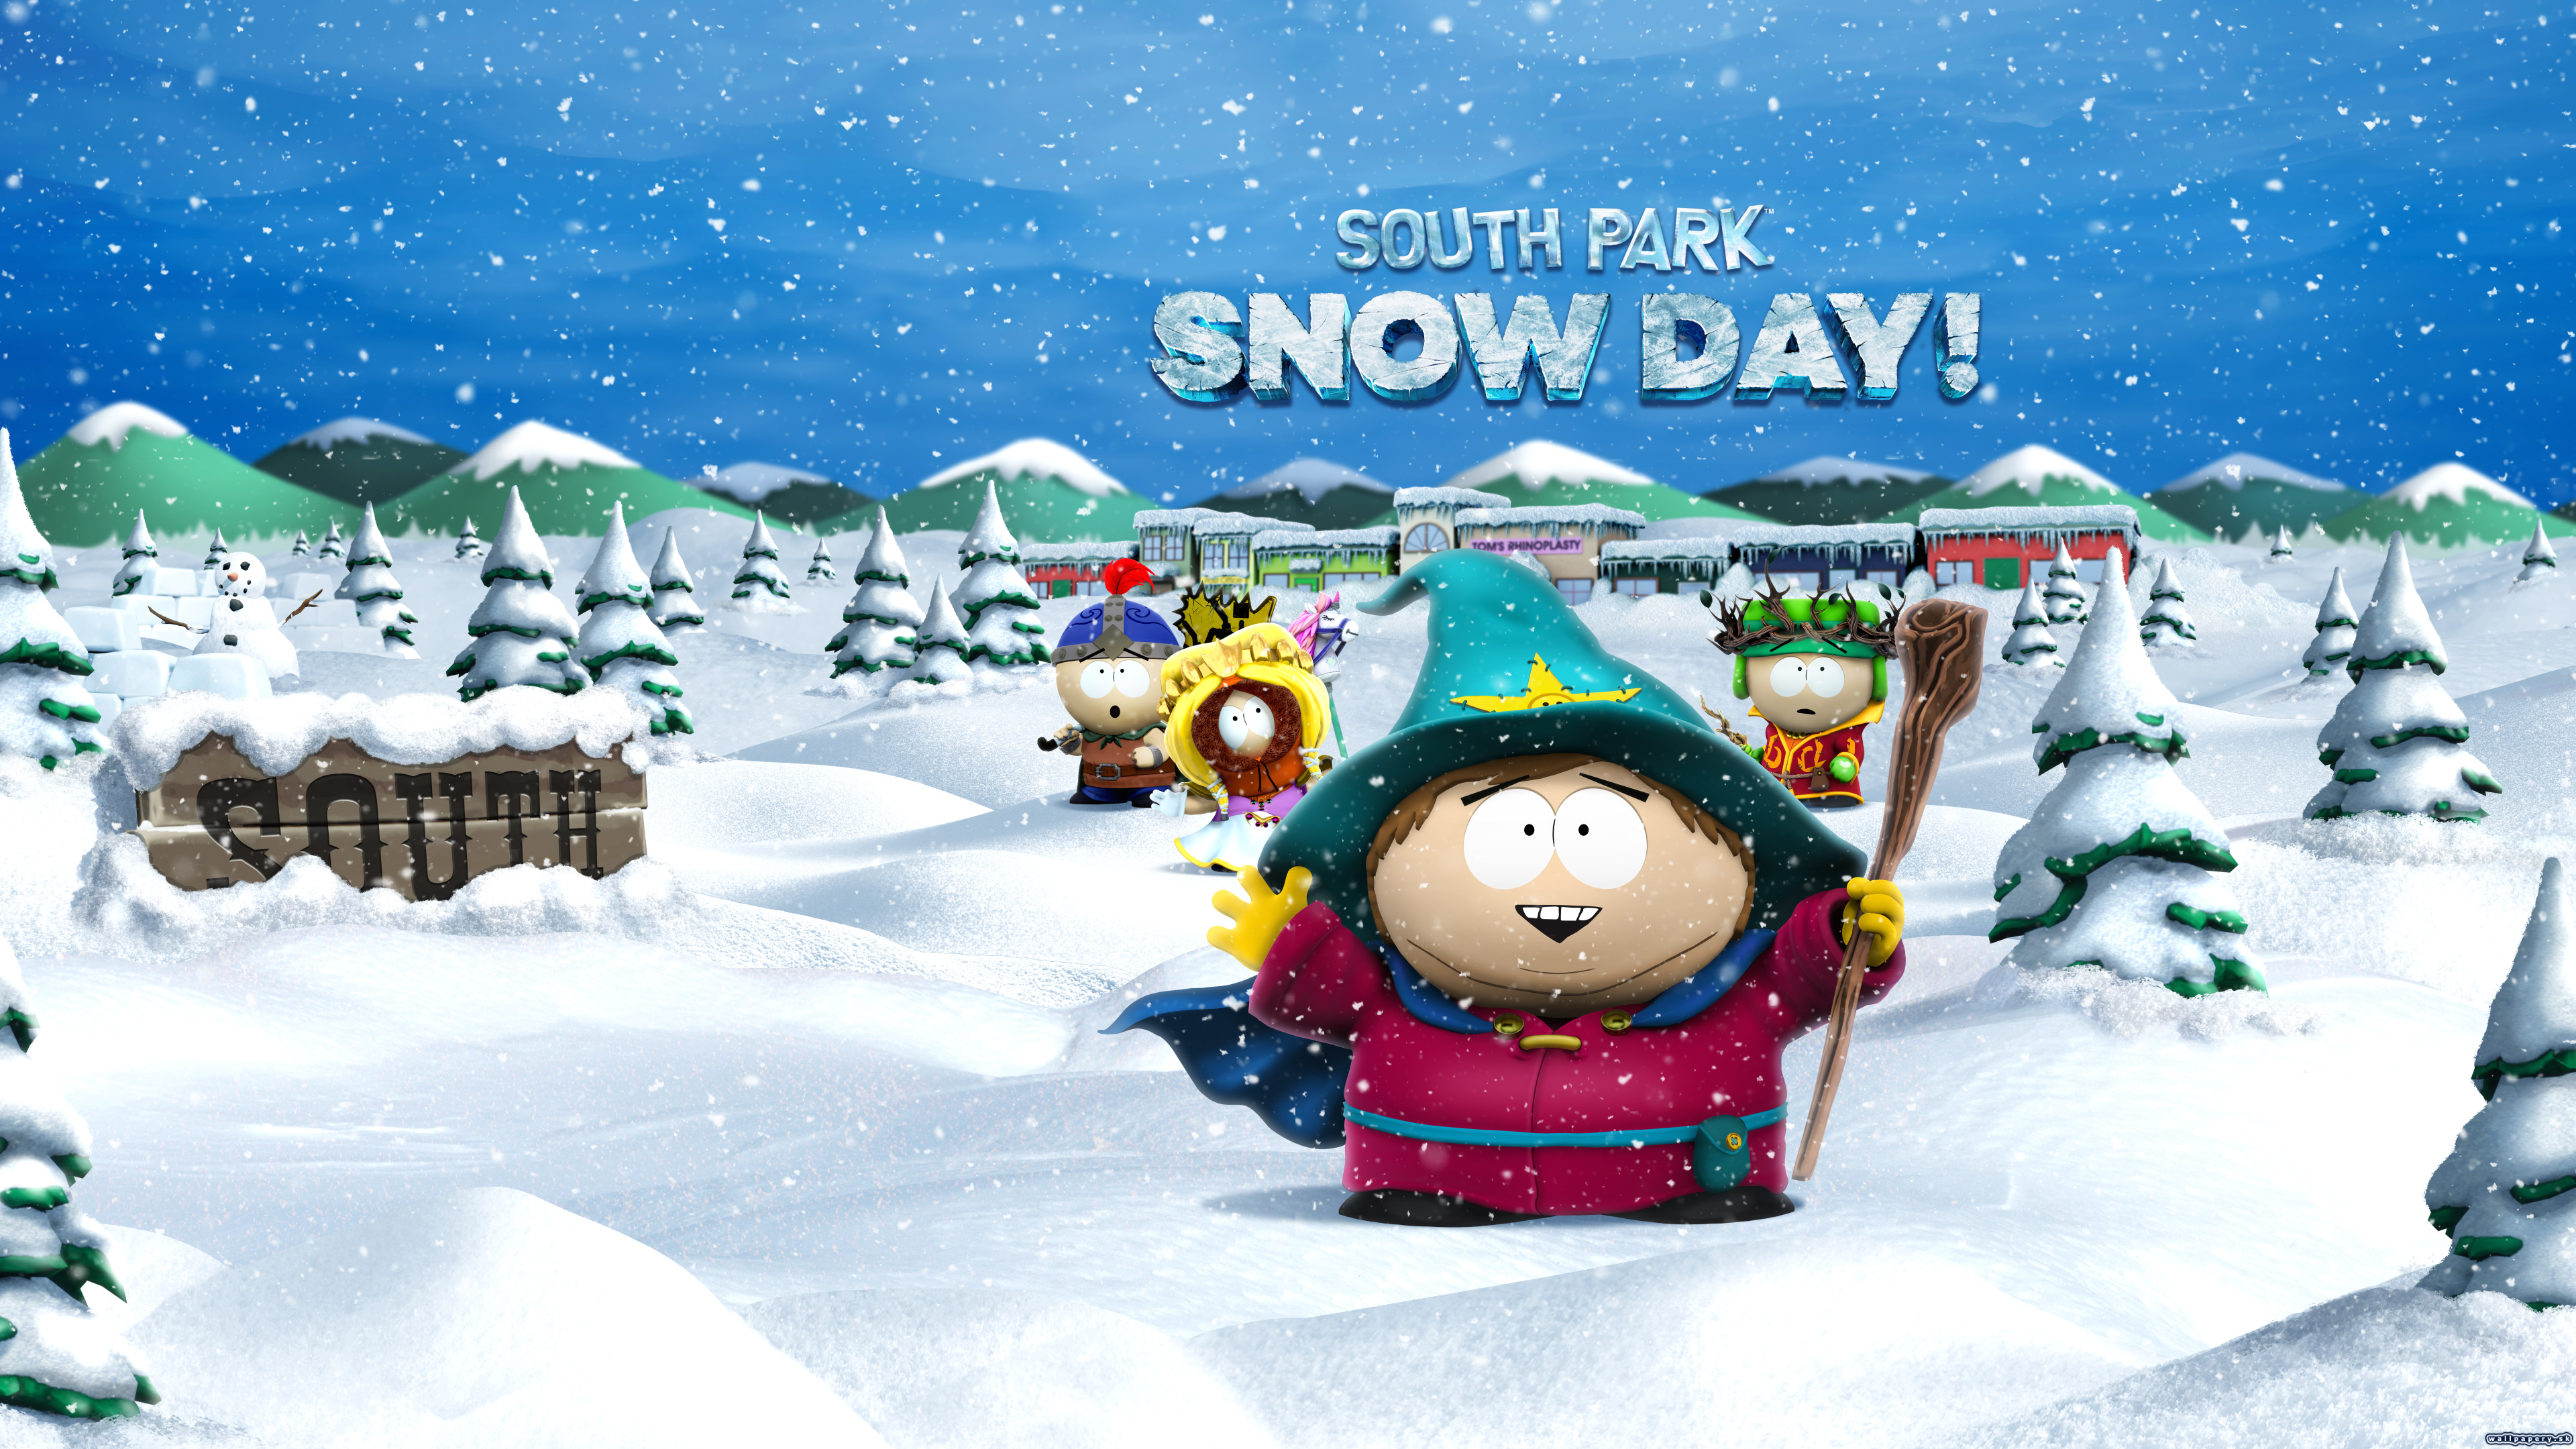 South Park: Snow Day! - wallpaper 1